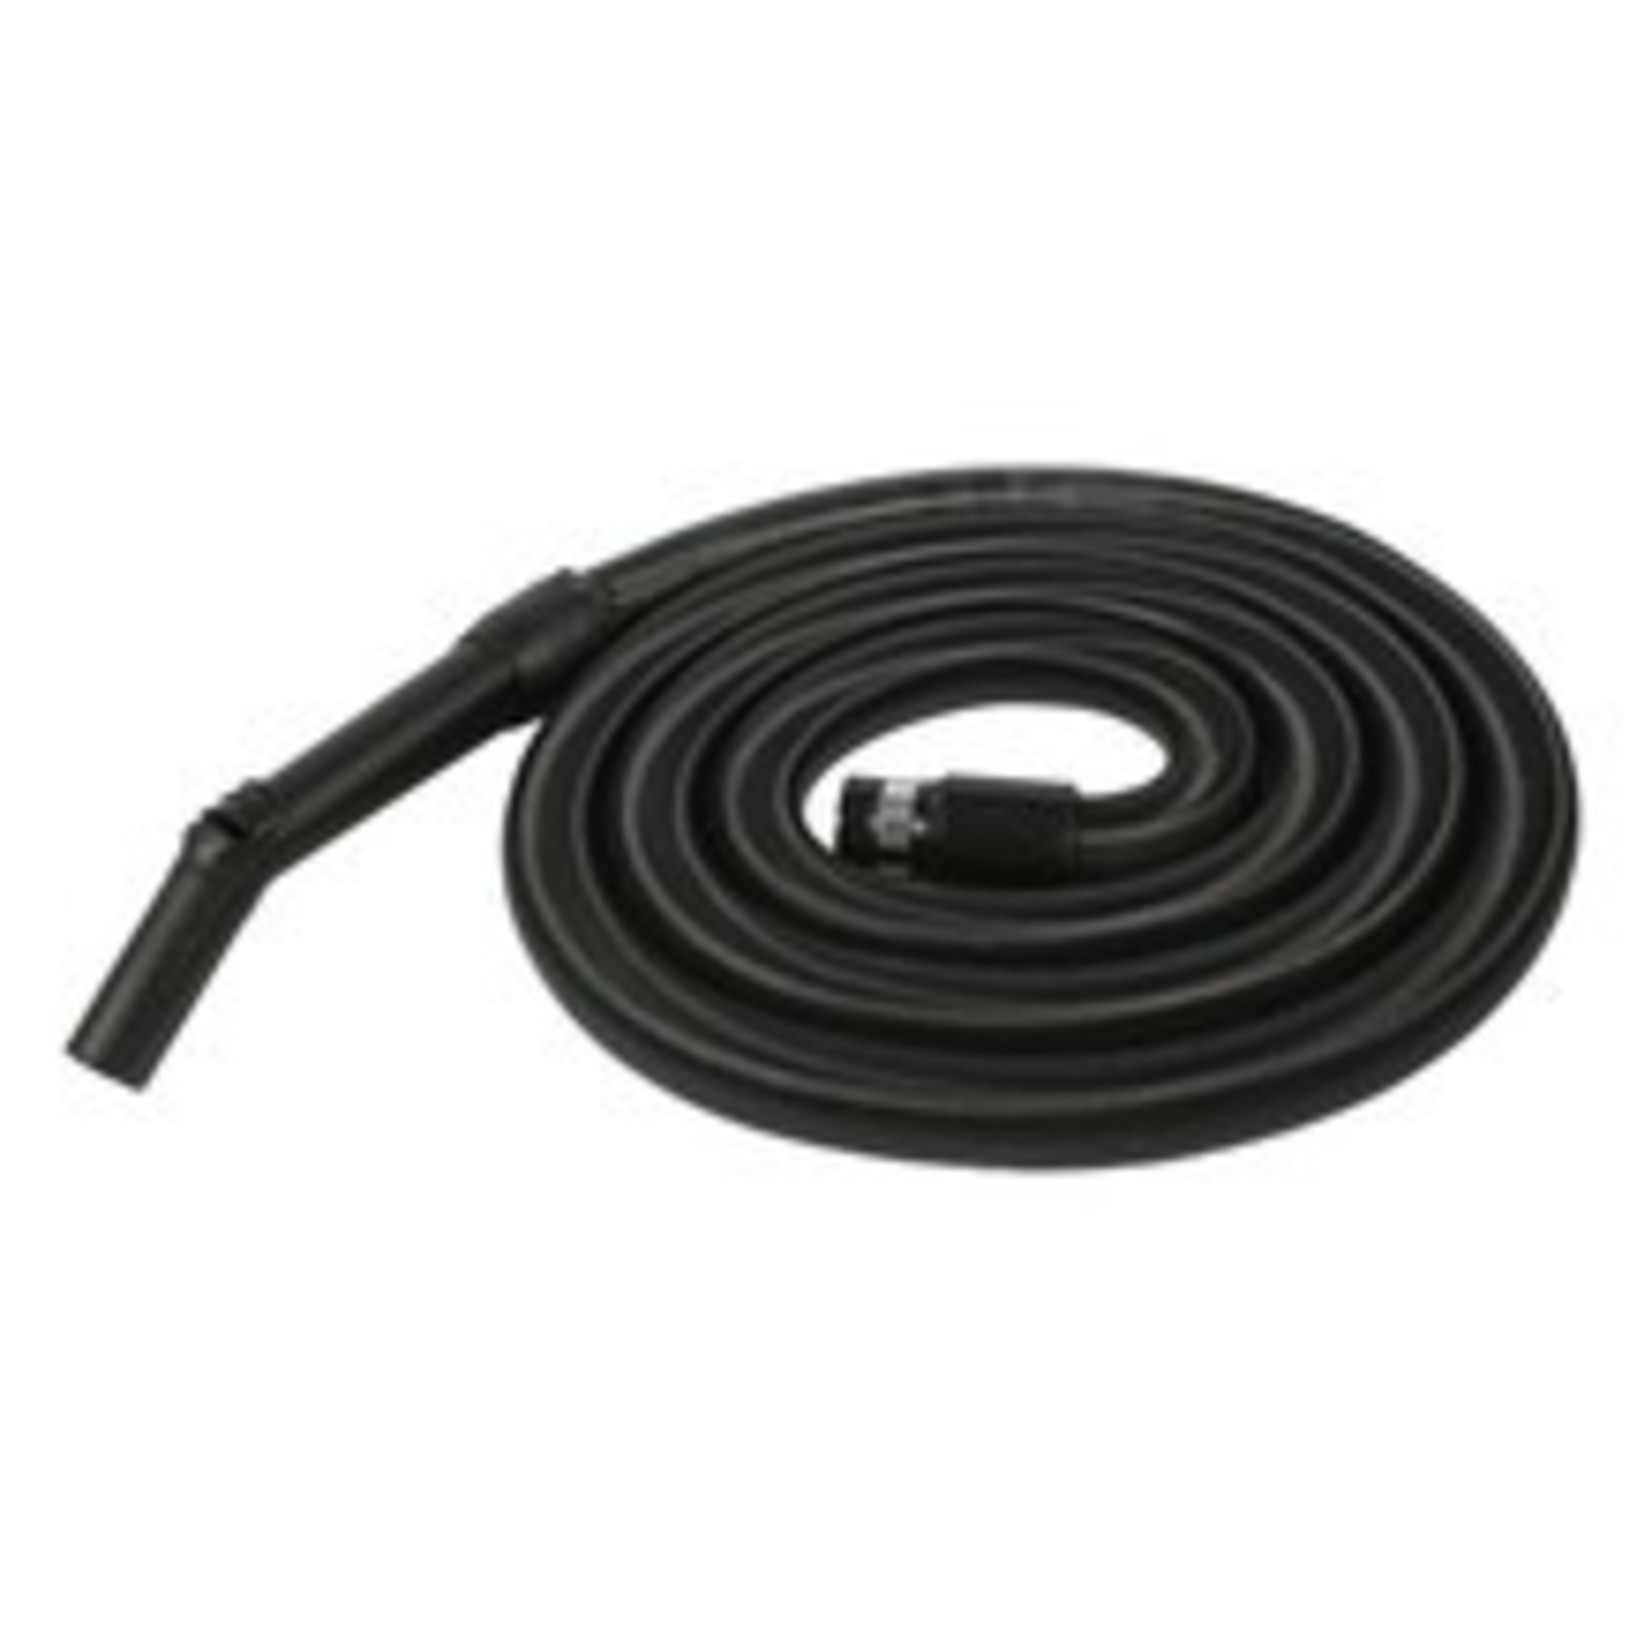 Central Vacuum 4 to 1 Stretch Hose w/ Ends - 4' x 1.25" (Stretched 4'=16')